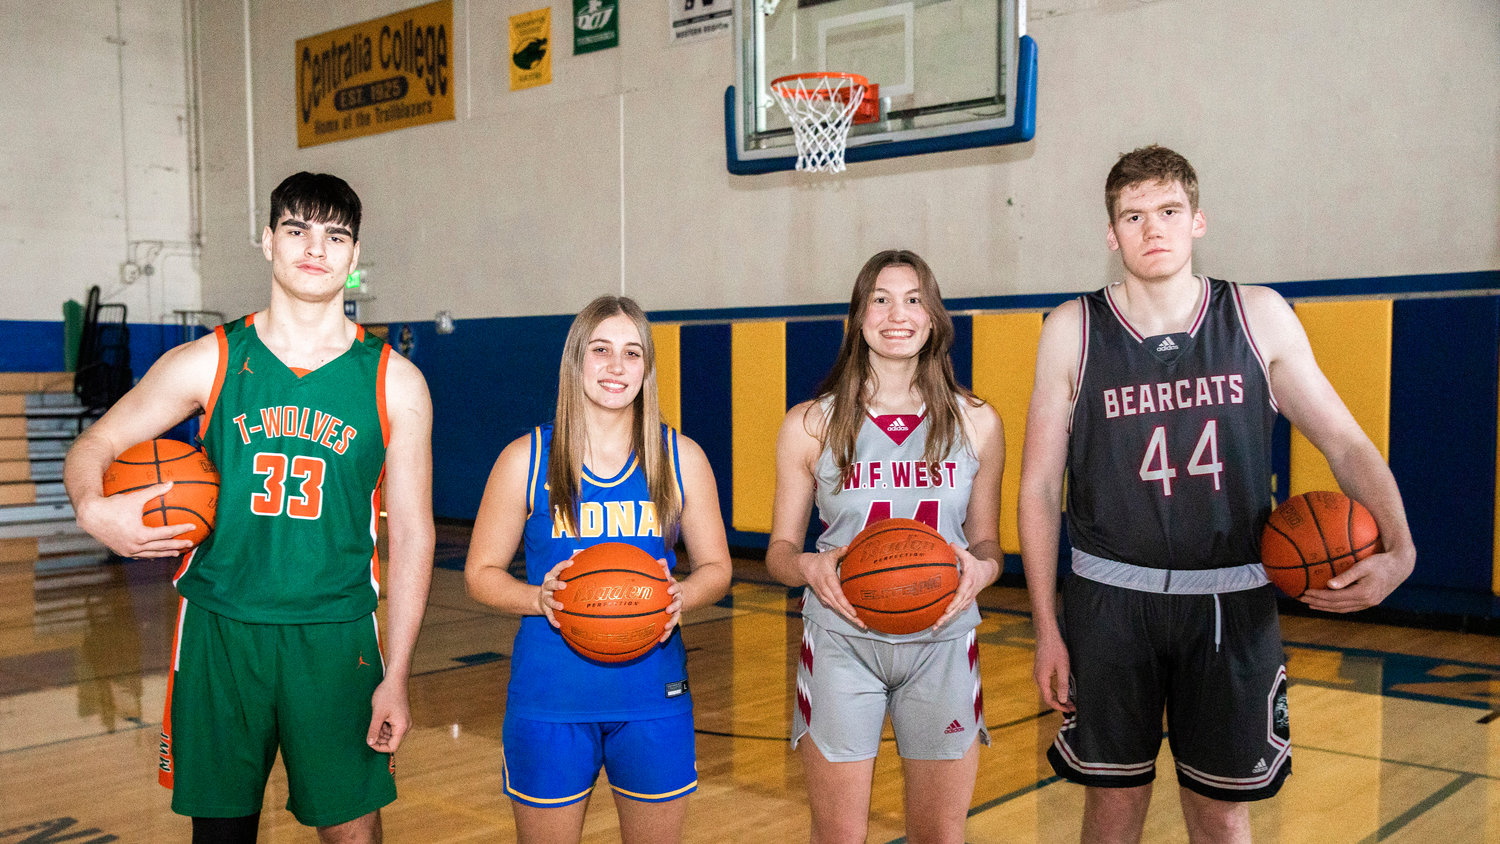 From left, MWP’s Josh Salguero, Adna’s Karlee VonMoos, and W.F. West’s Juila and Soren Dalan hold basketballs and pose for a photo in the Centralia College gymnasium on Tuesday.